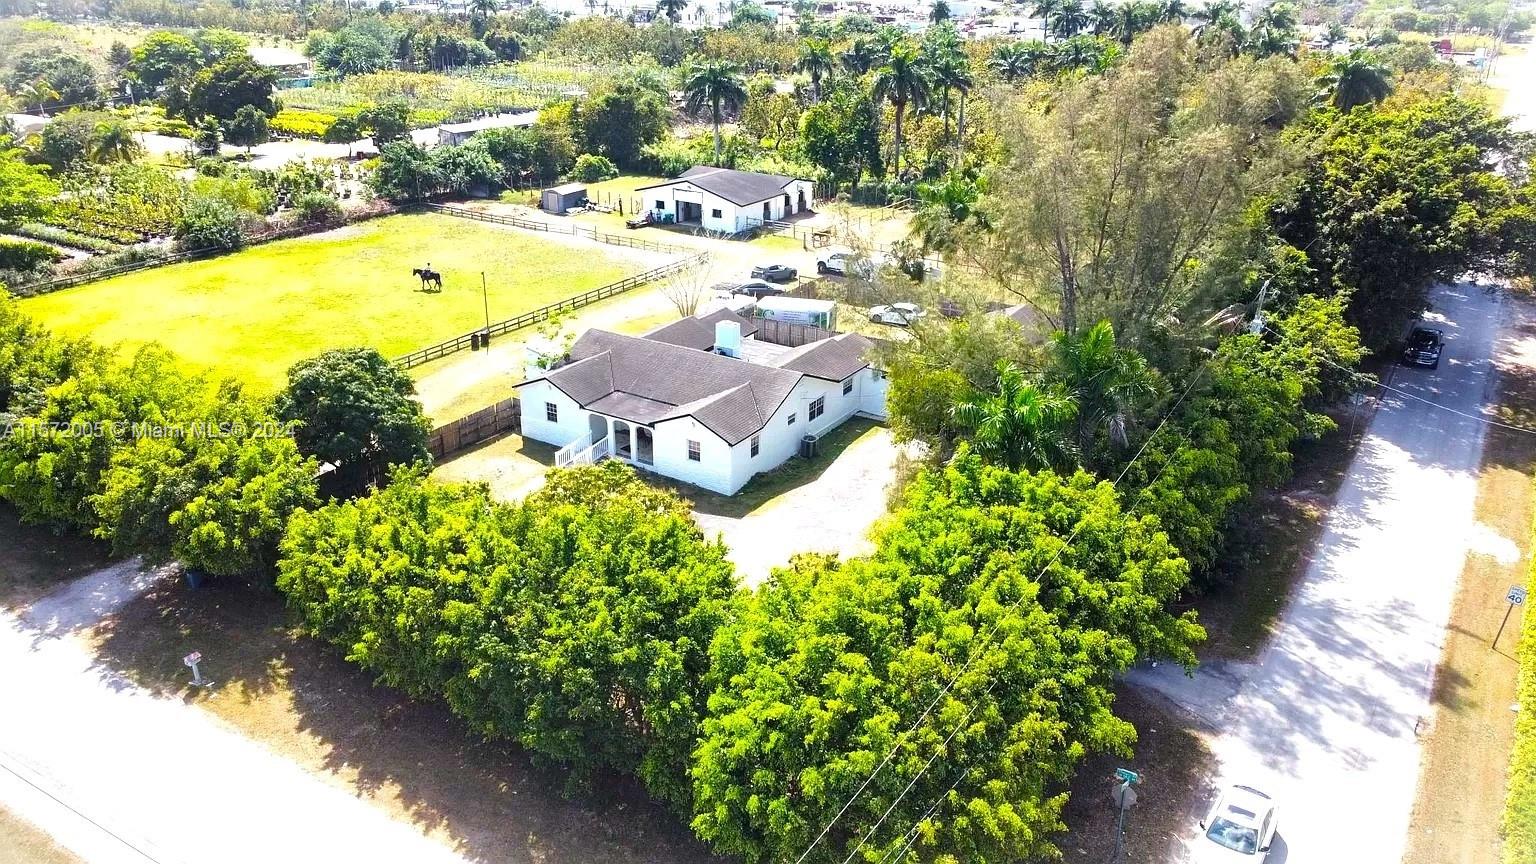 25600 Sw 182nd Ave, Homestead, Miami-Dade County, Florida - 5 Bedrooms  
3 Bathrooms - 